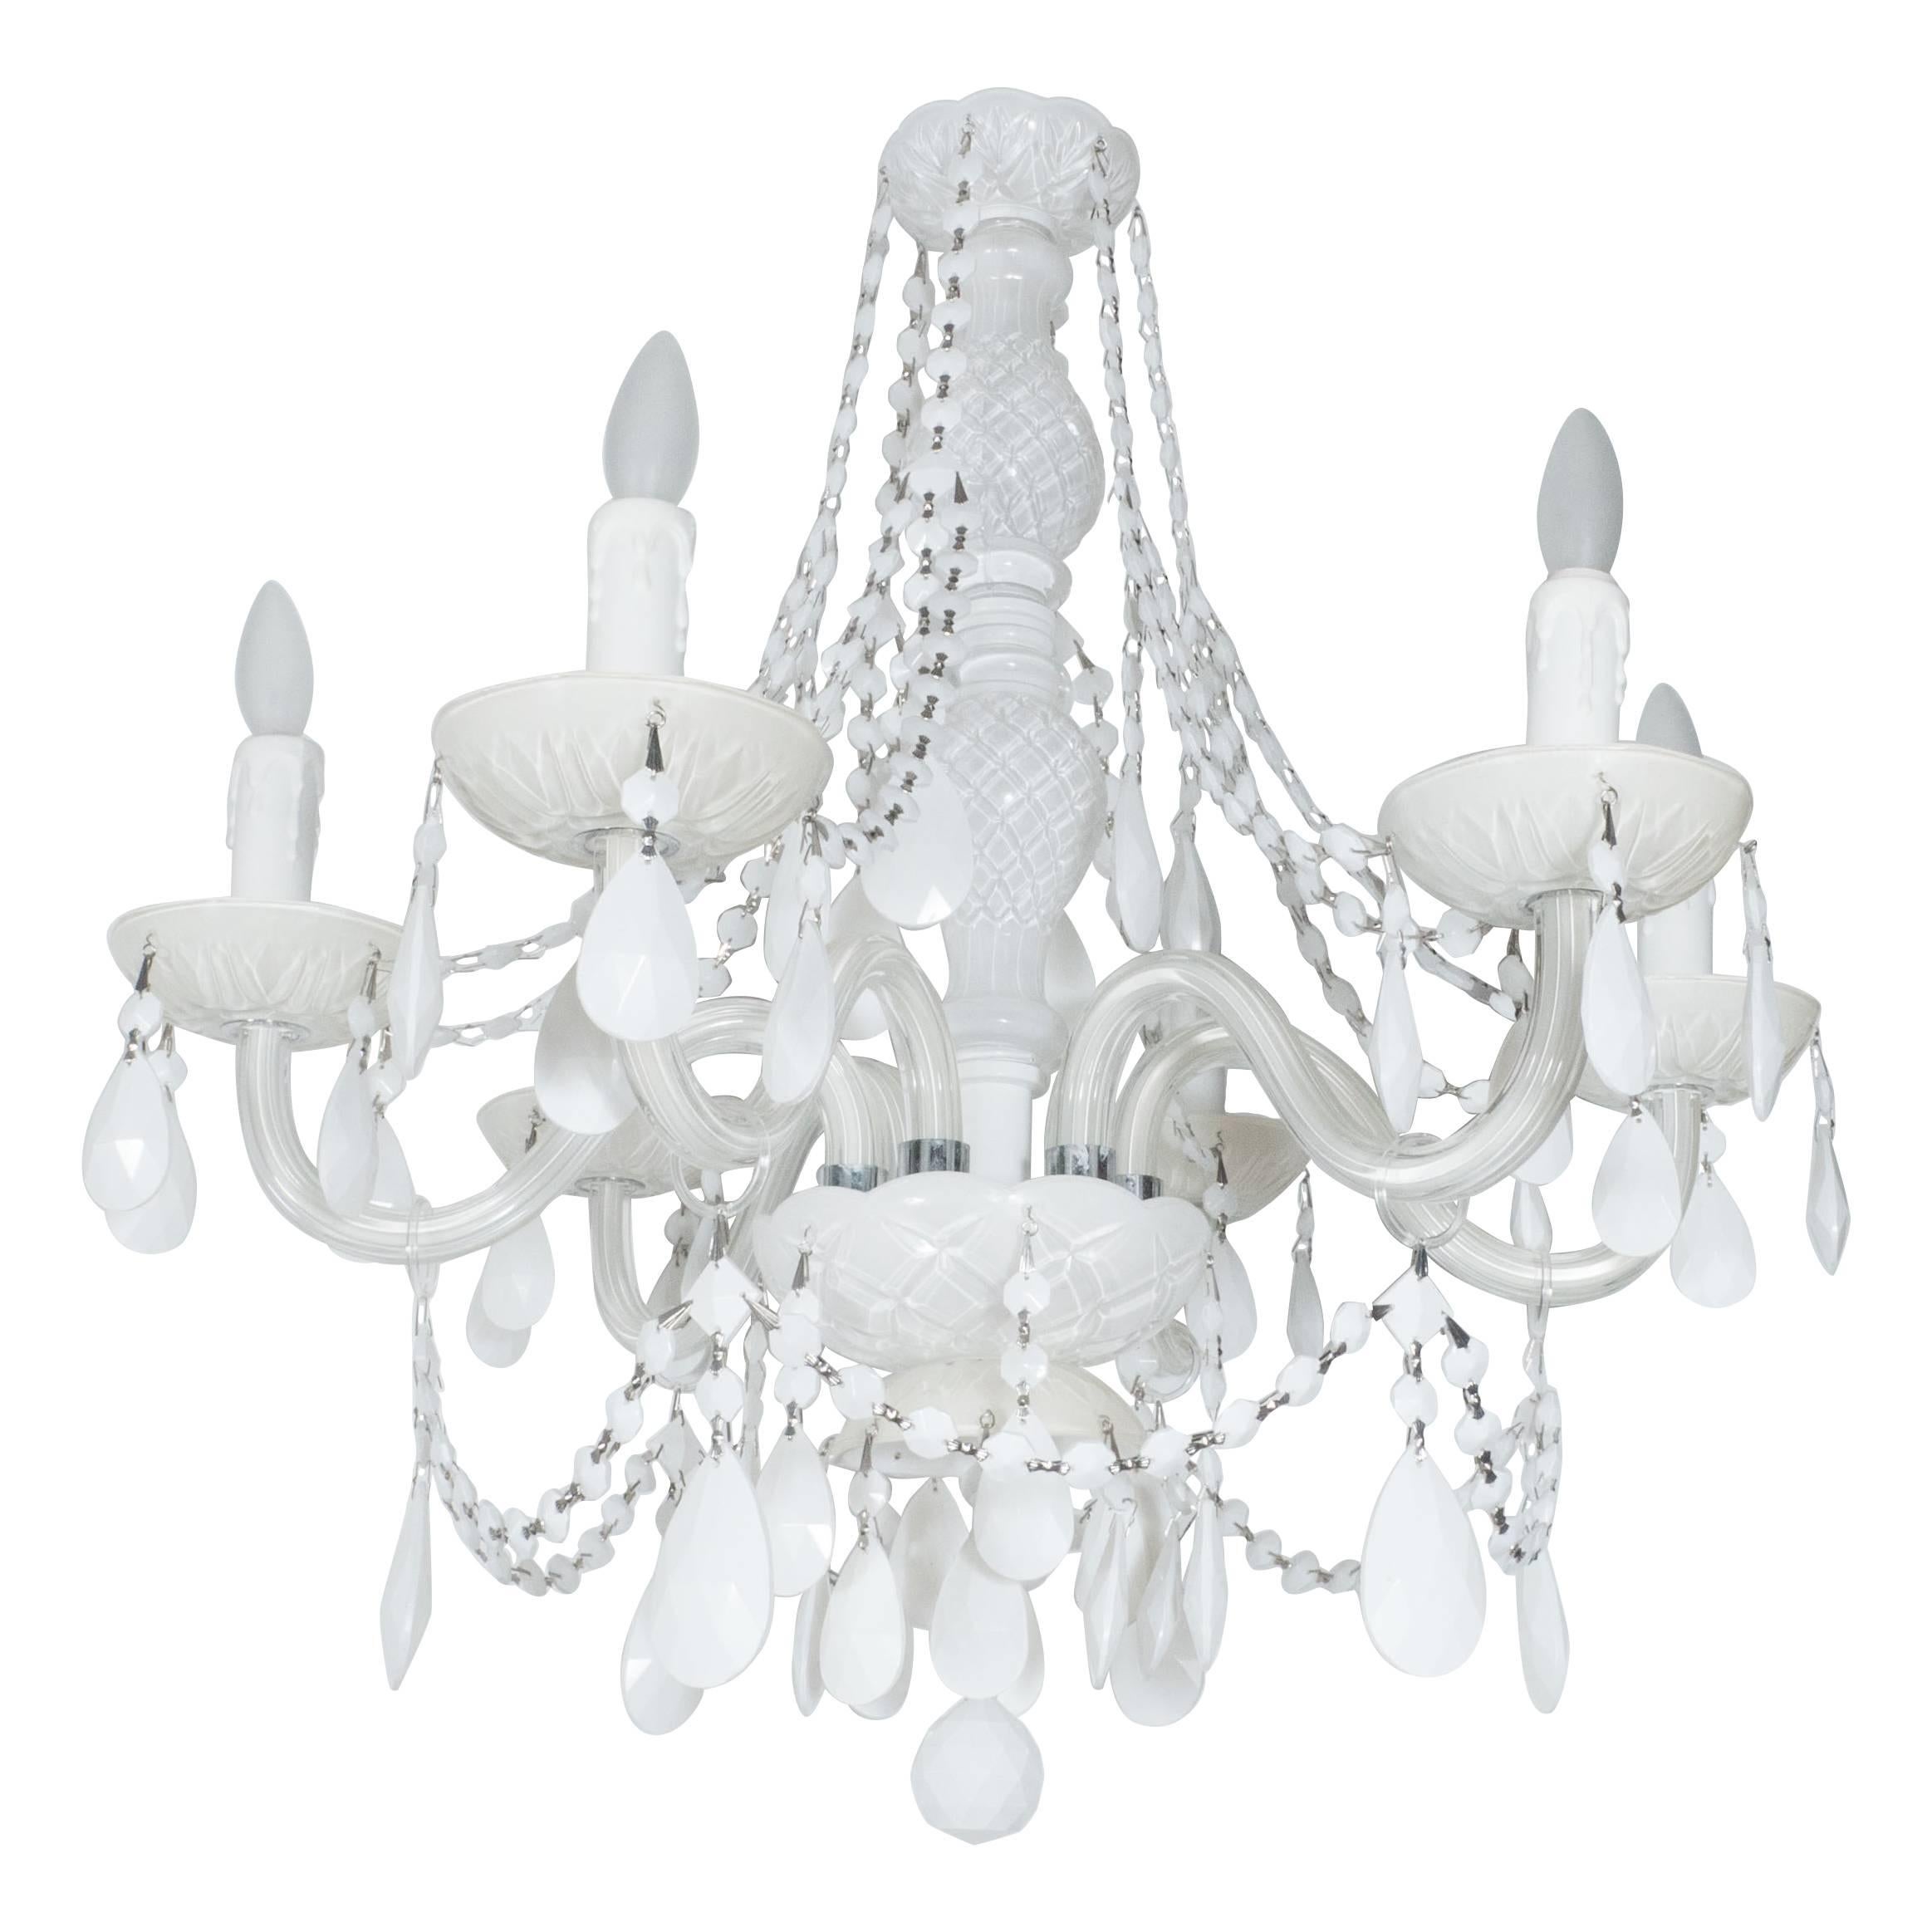 Glamorous Hollywood Regency Chandelier in White Pigment Glass and Jewel Pendants